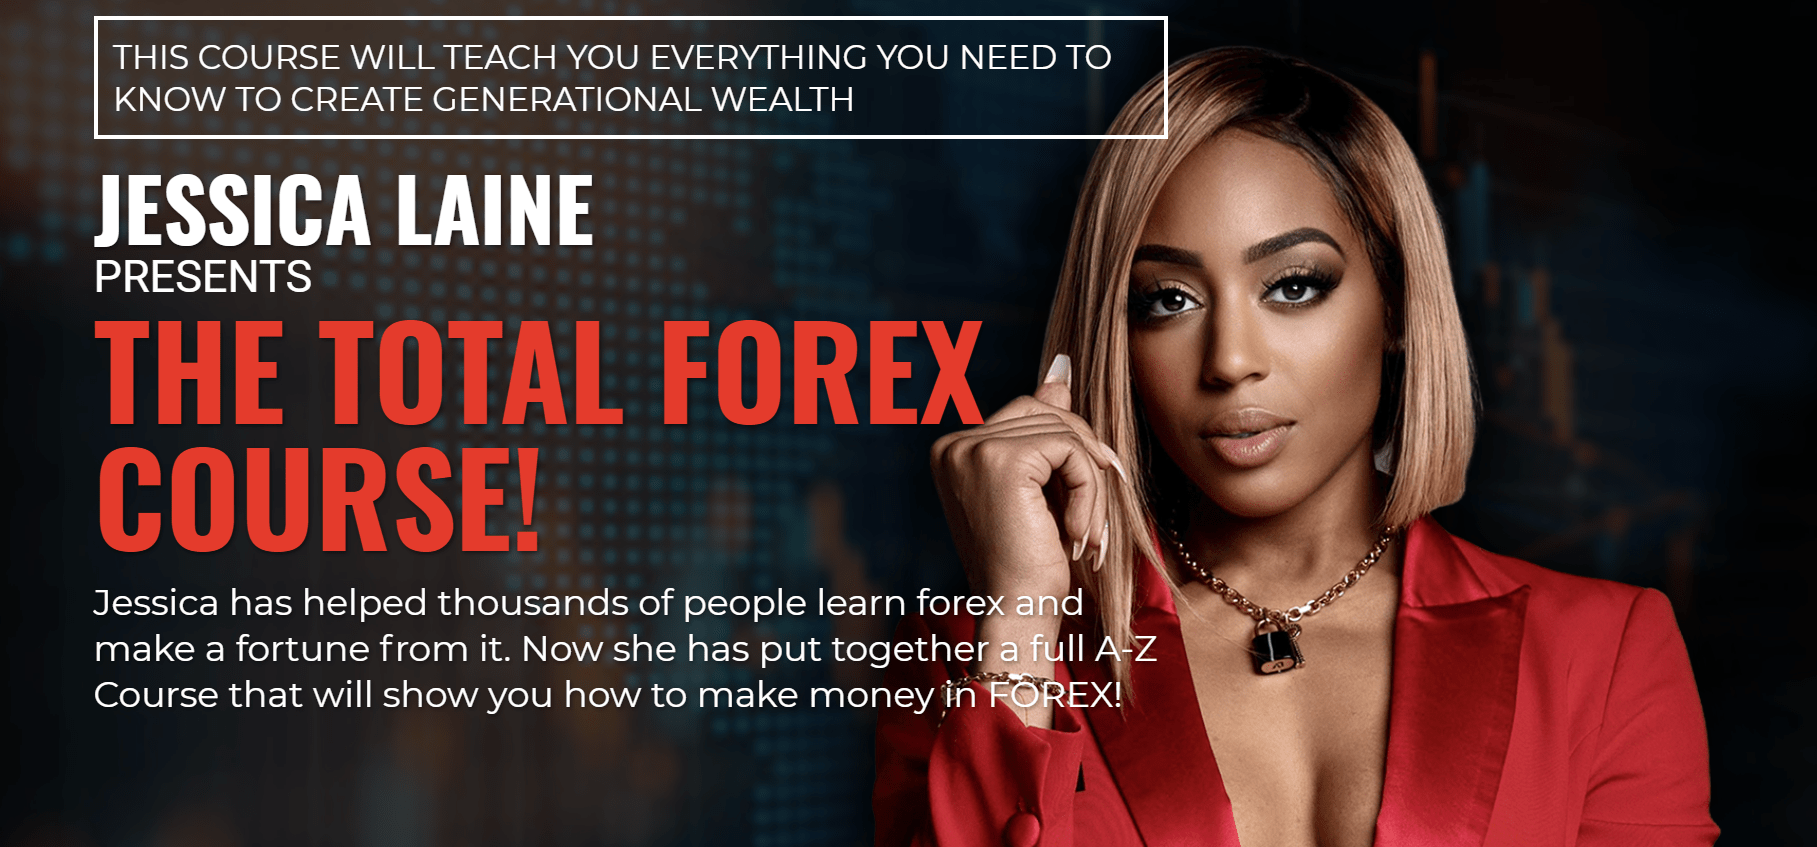 Jessica Laine - jess invest TOTAL Forex COURSE!